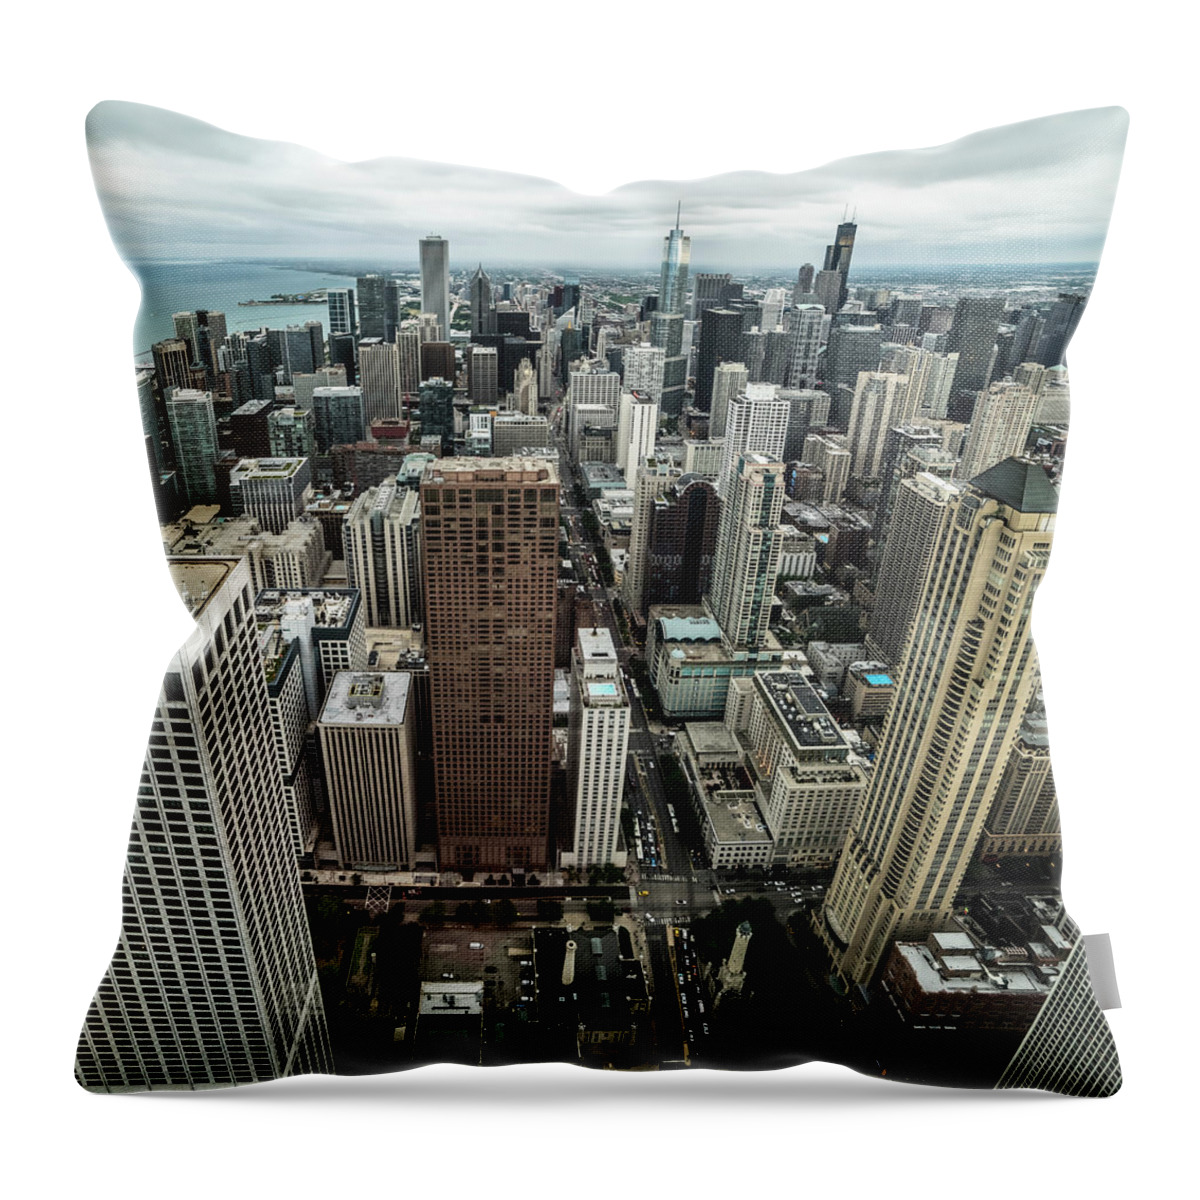 Chicago Throw Pillow featuring the photograph Chicago Aerial by Ryan Heffron